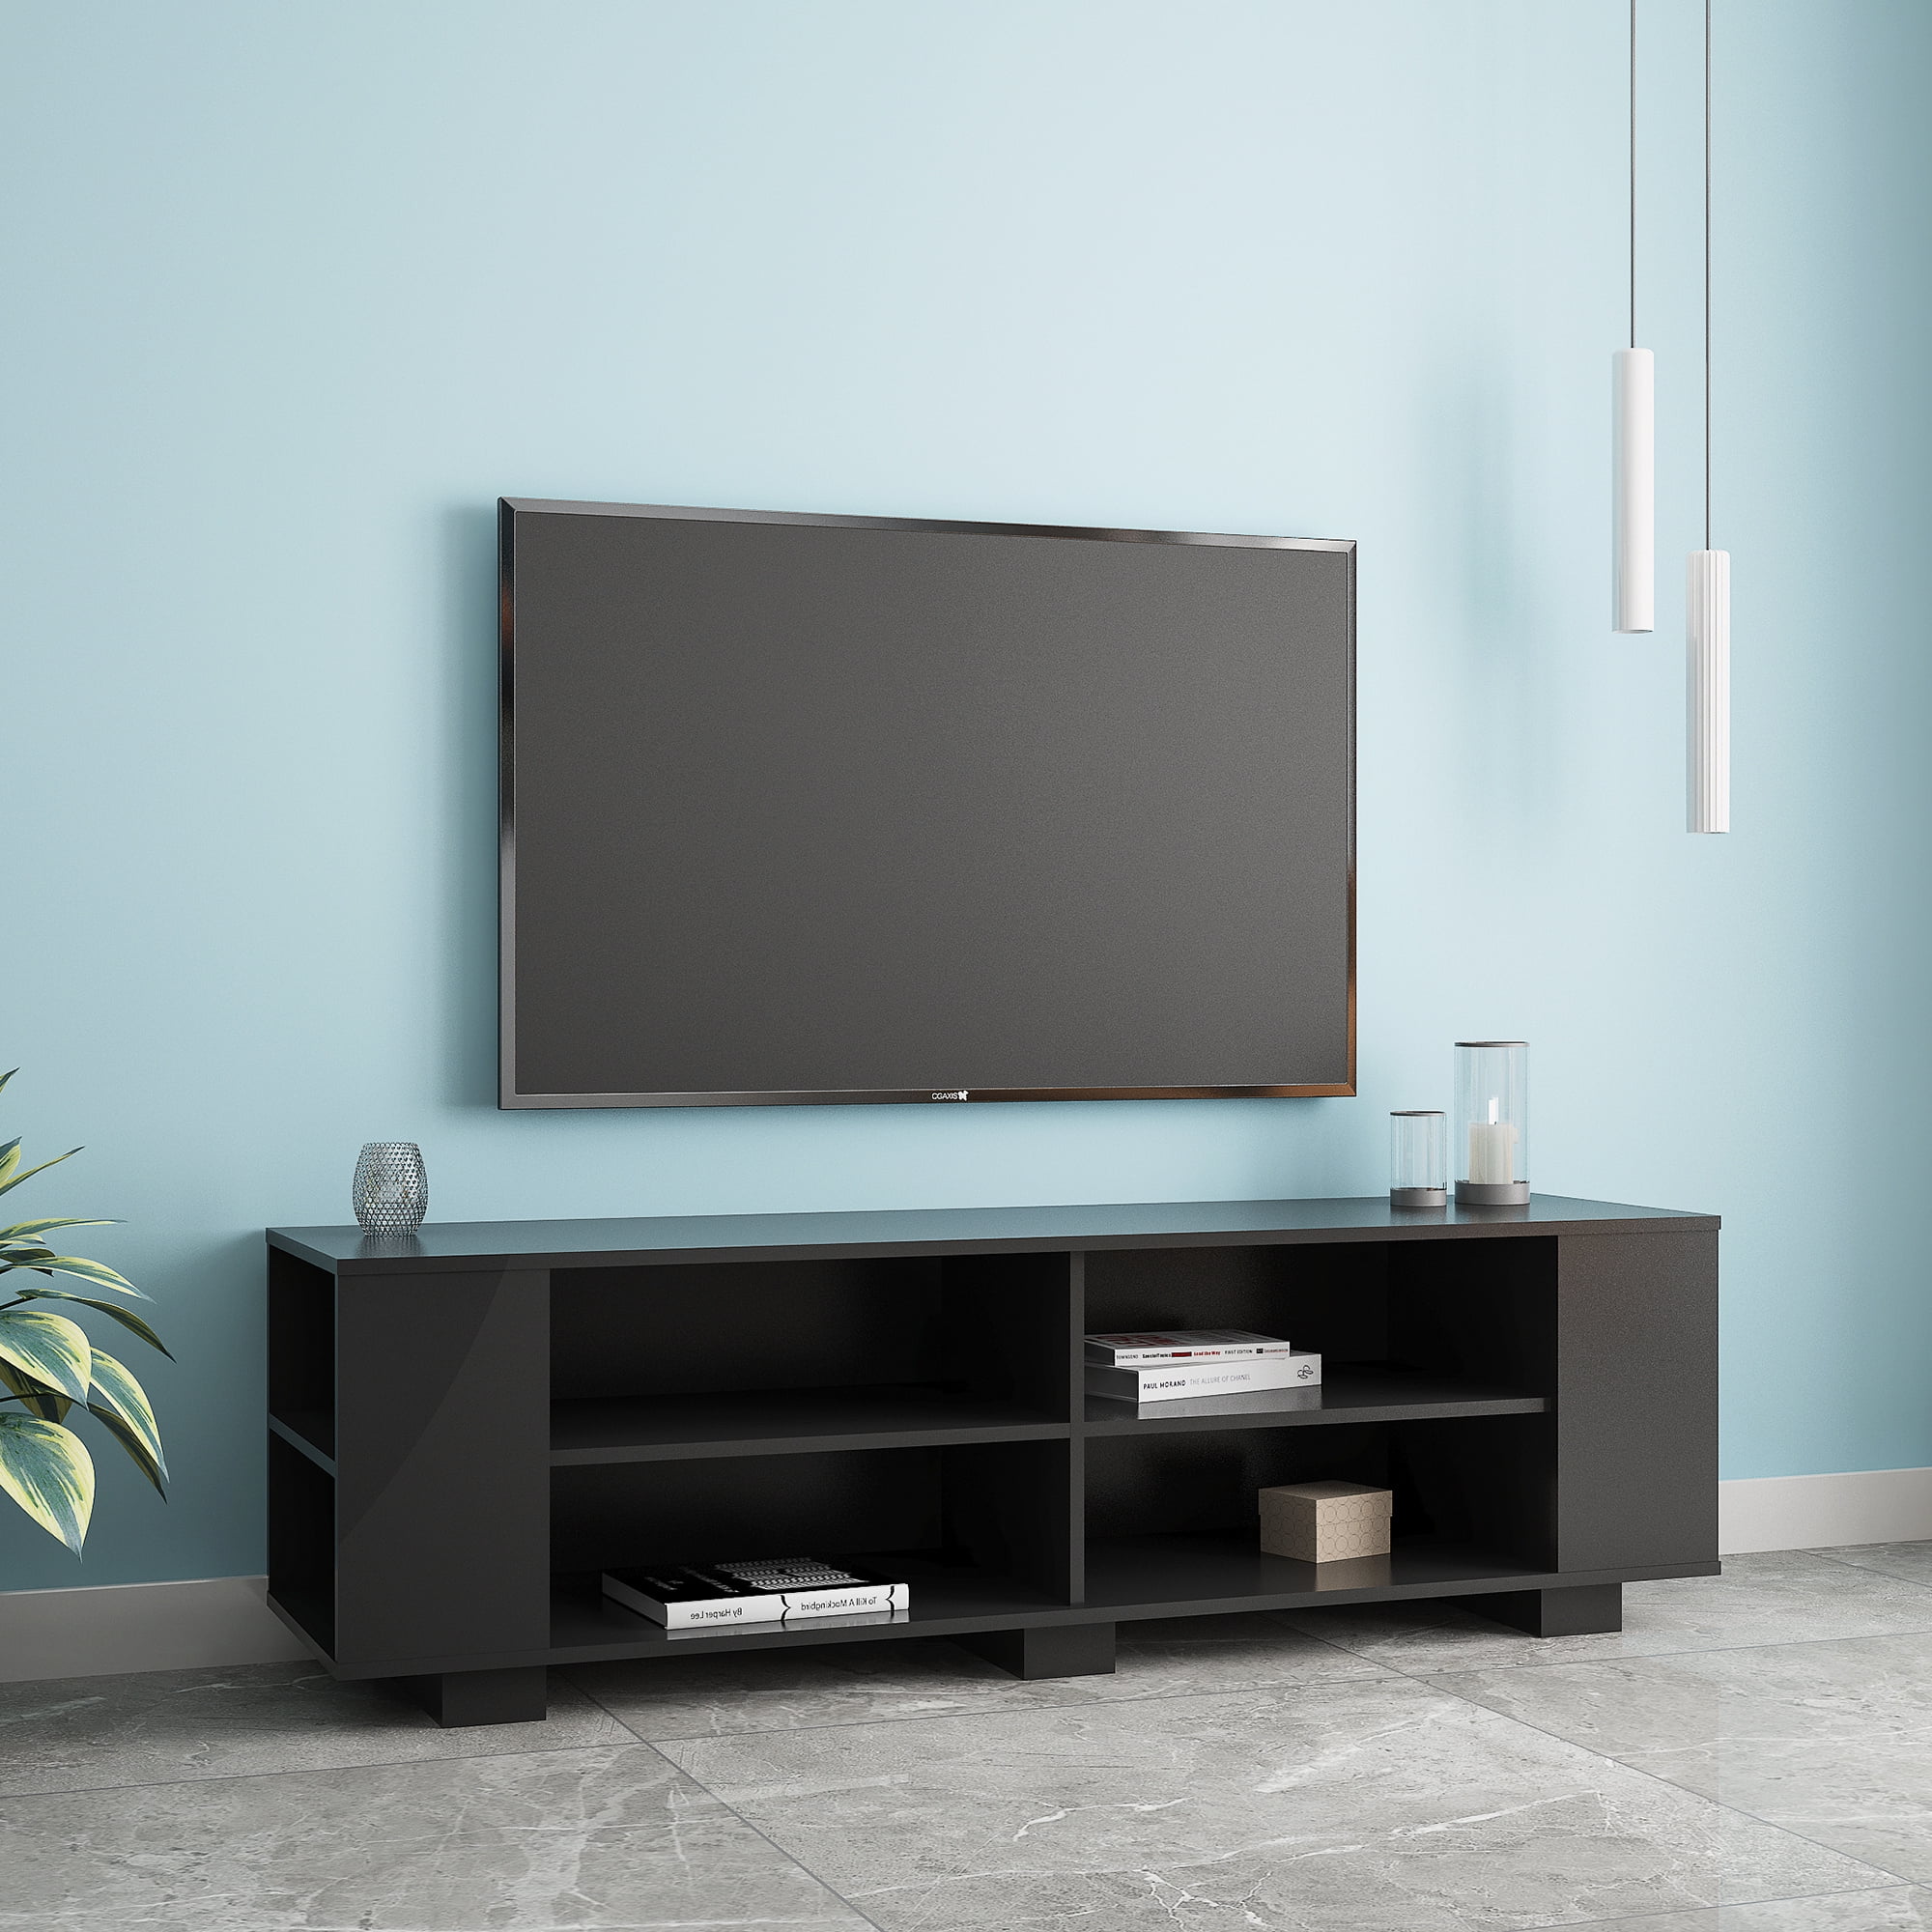 TV Stand Storage for TVS up to 65 Inches With 3 Display Tempered Glass Shelves for sale online 